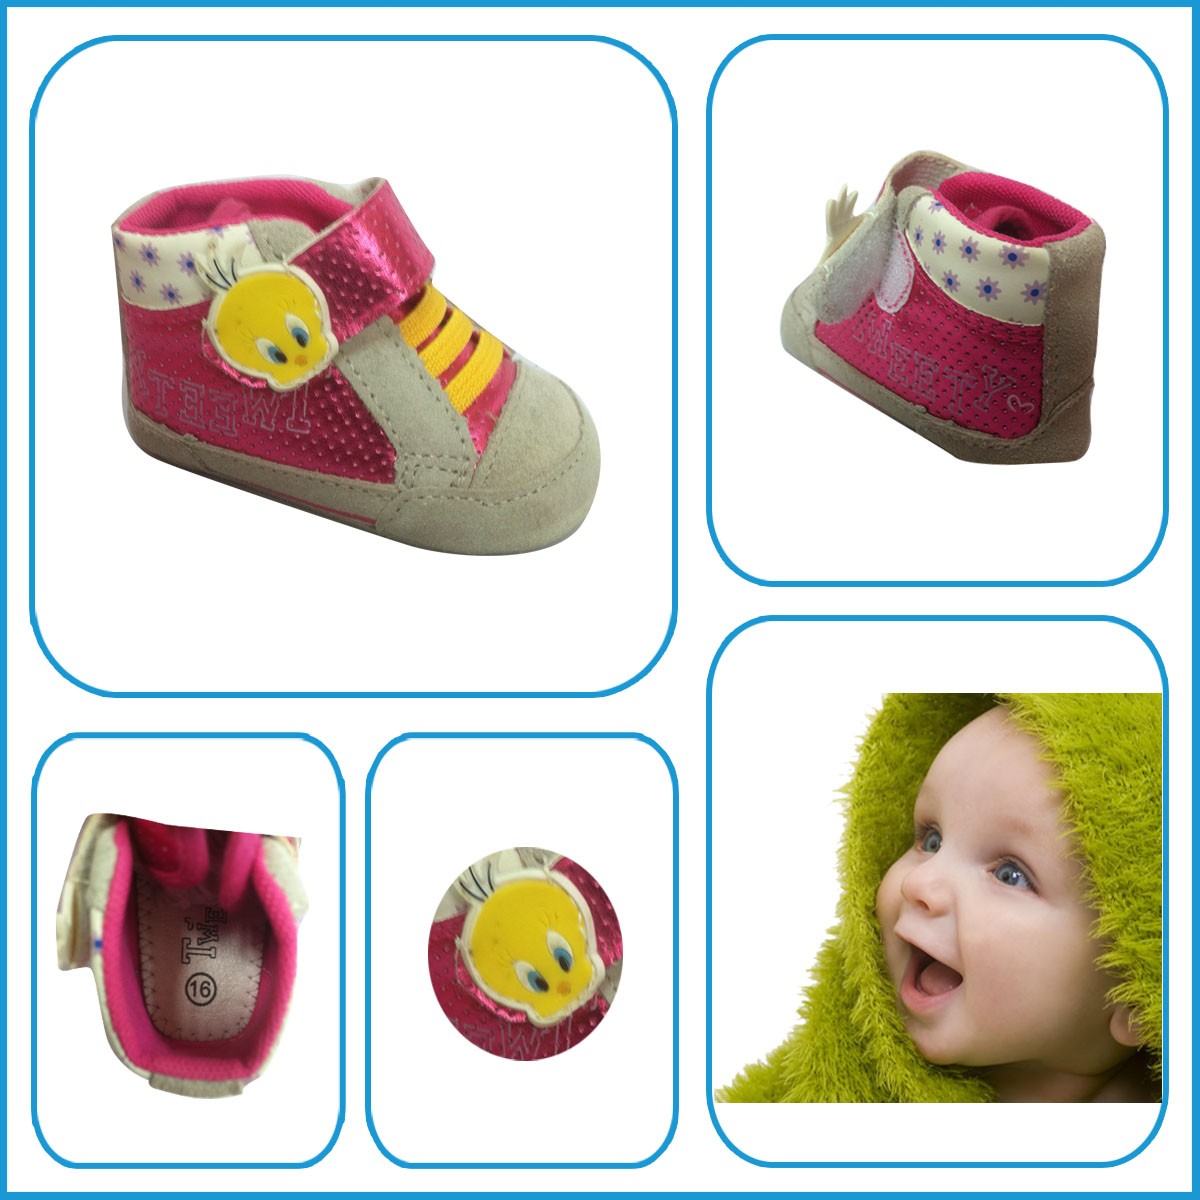 Hot selling shoes Services Wholesale Fancy Lovely Pink Shining PU Upper Baby Shoes With Cartoon Hasp from China Jinjiang